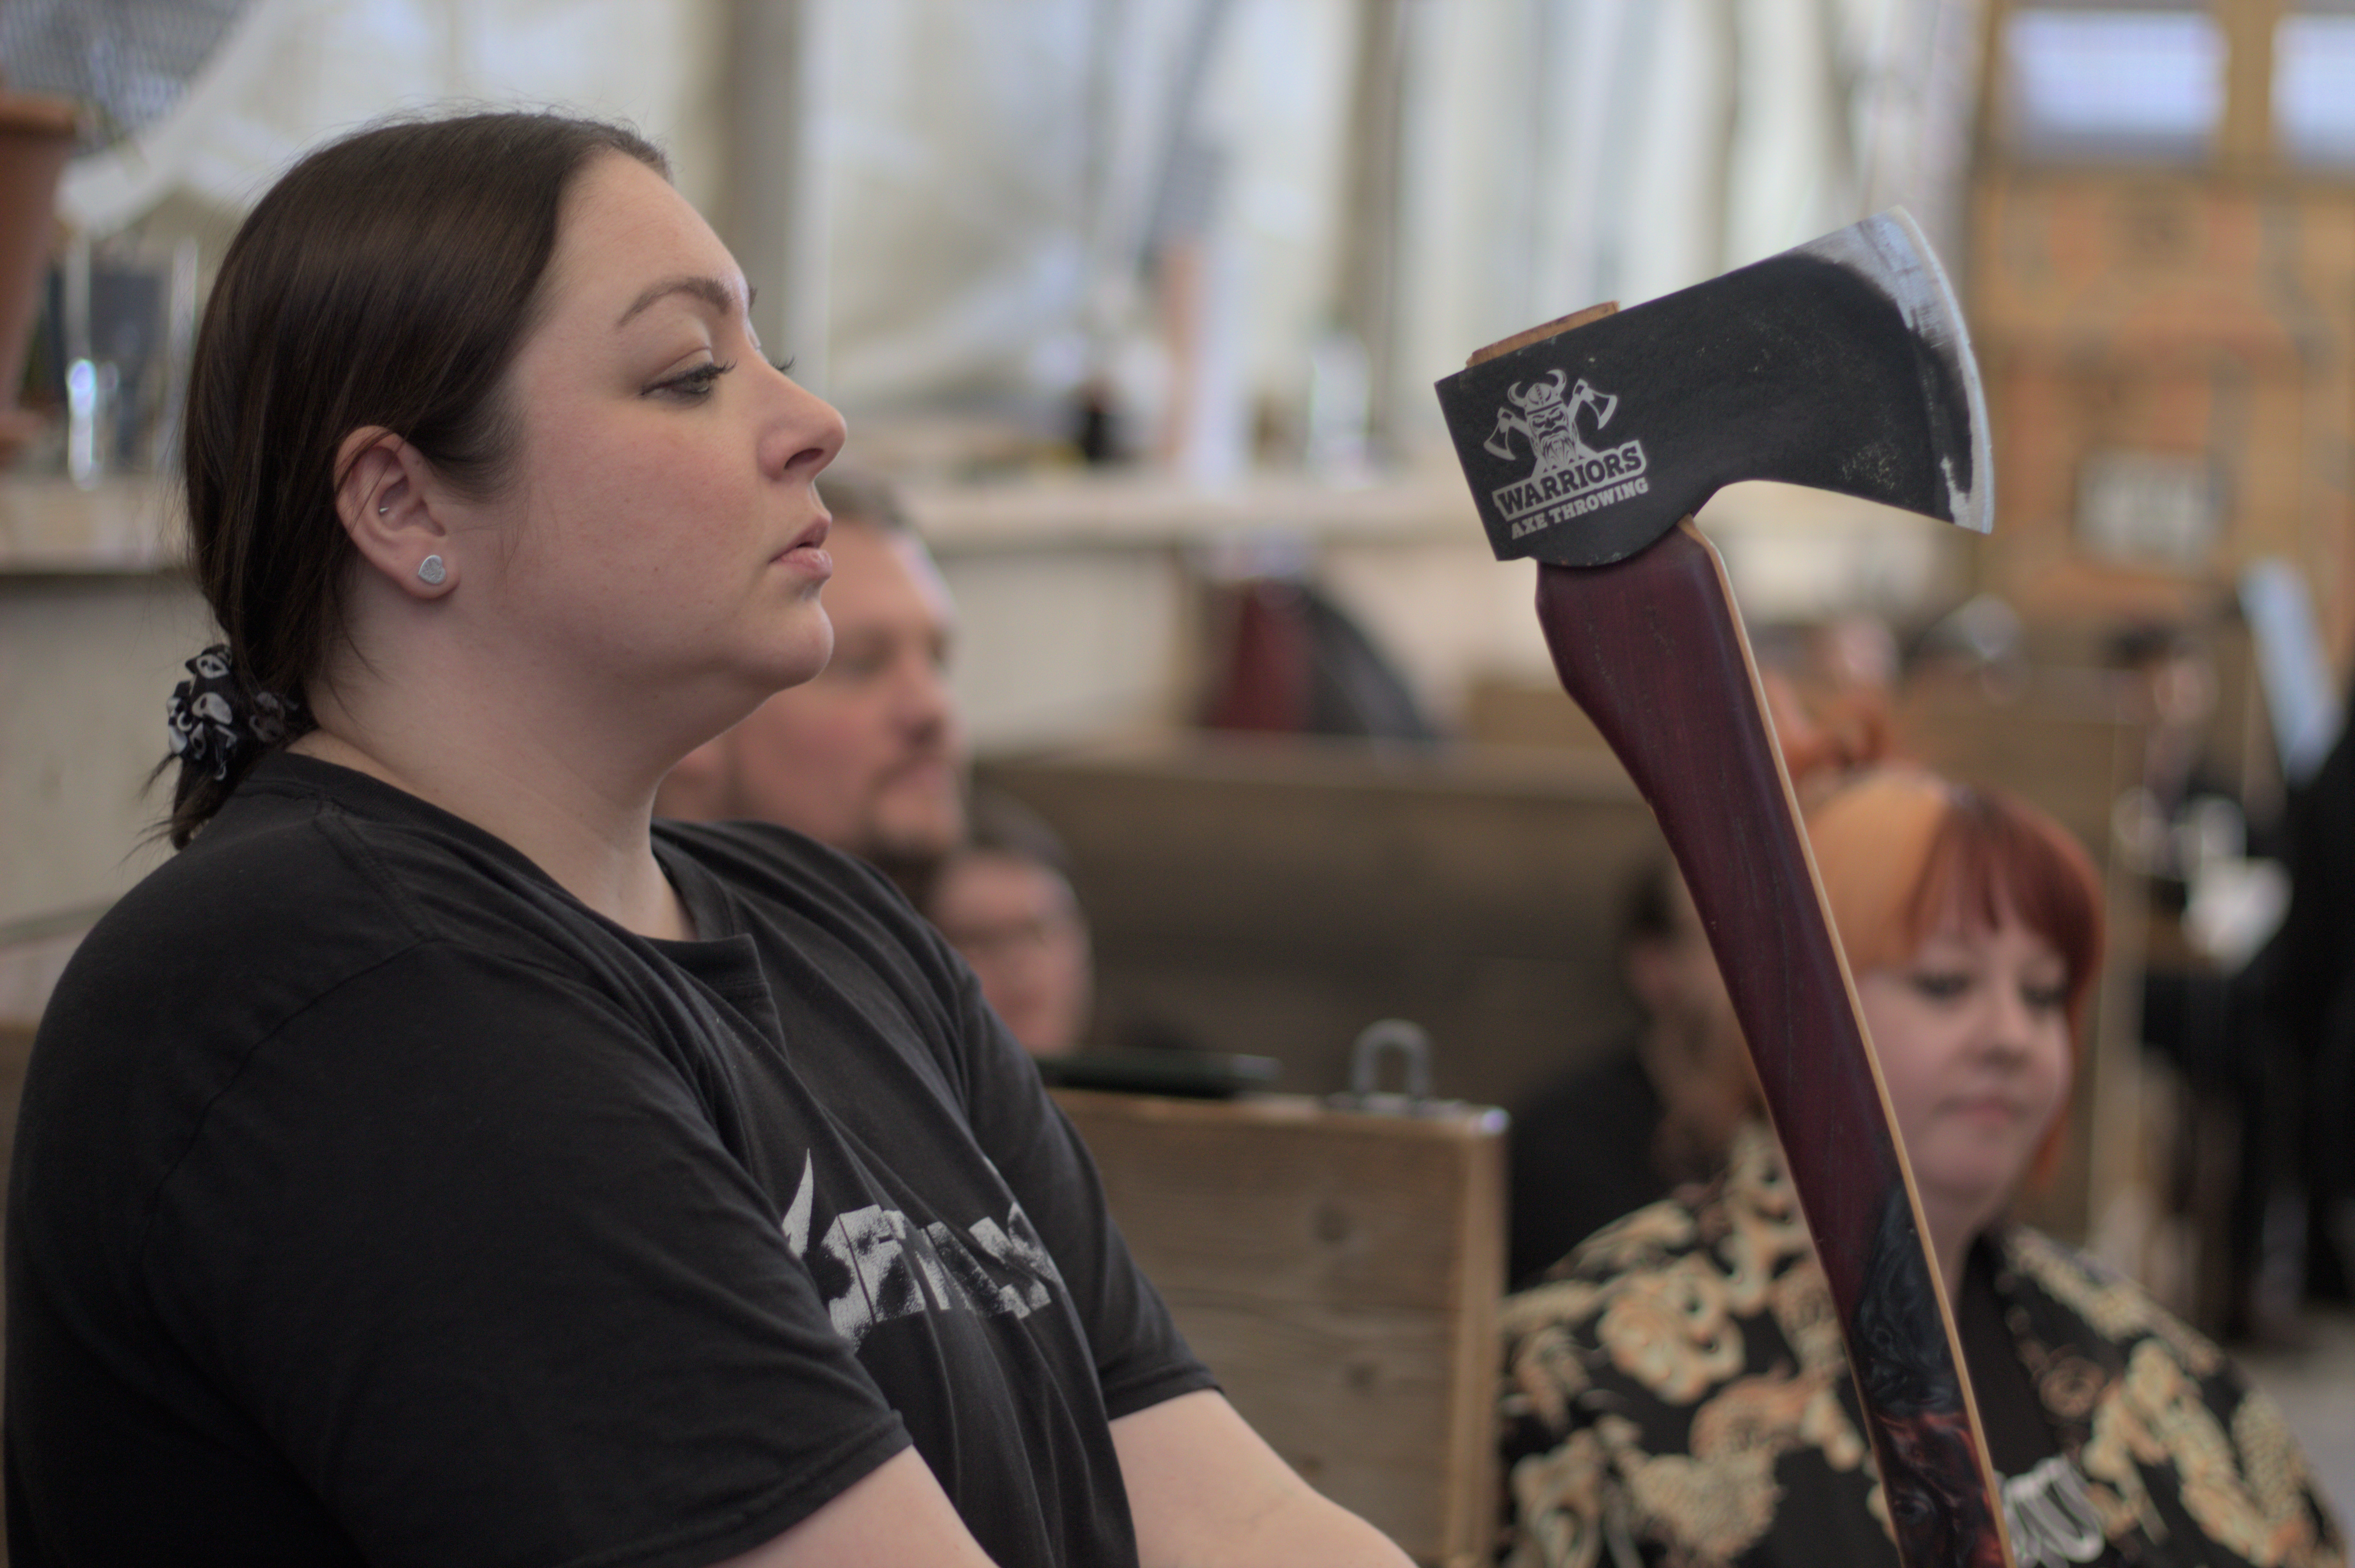 Kat set up Europe's first ladies-only axe-throwing club